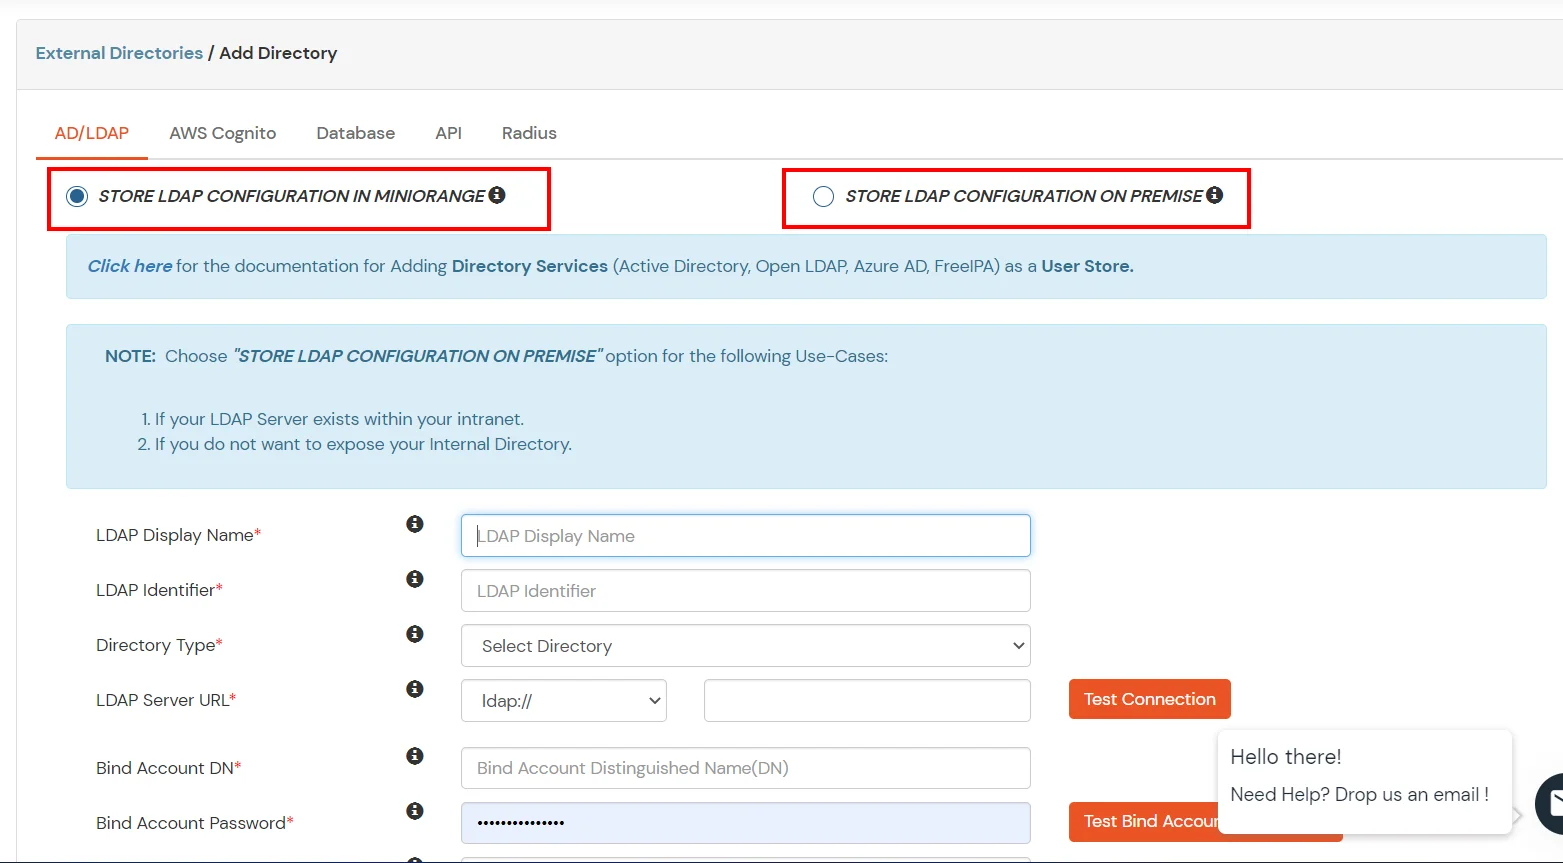 Workday Two-Factor Authentication : Select ad/ldap user store type